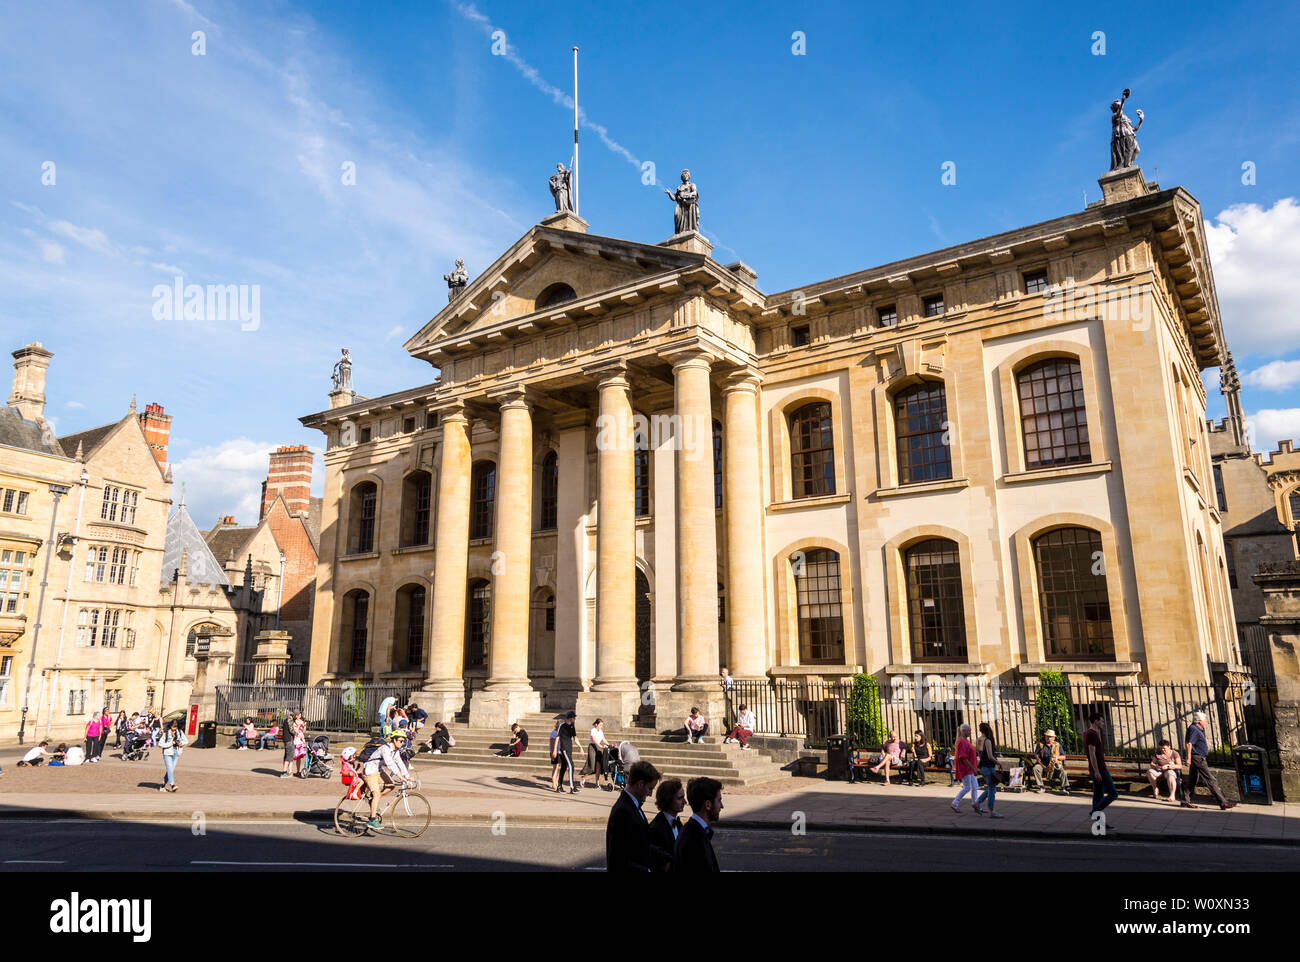 People sit on the steps at the front of the Clarendon Building brightly sunlit on a beautiful summery day in the famous university town of Oxford Stock Photo